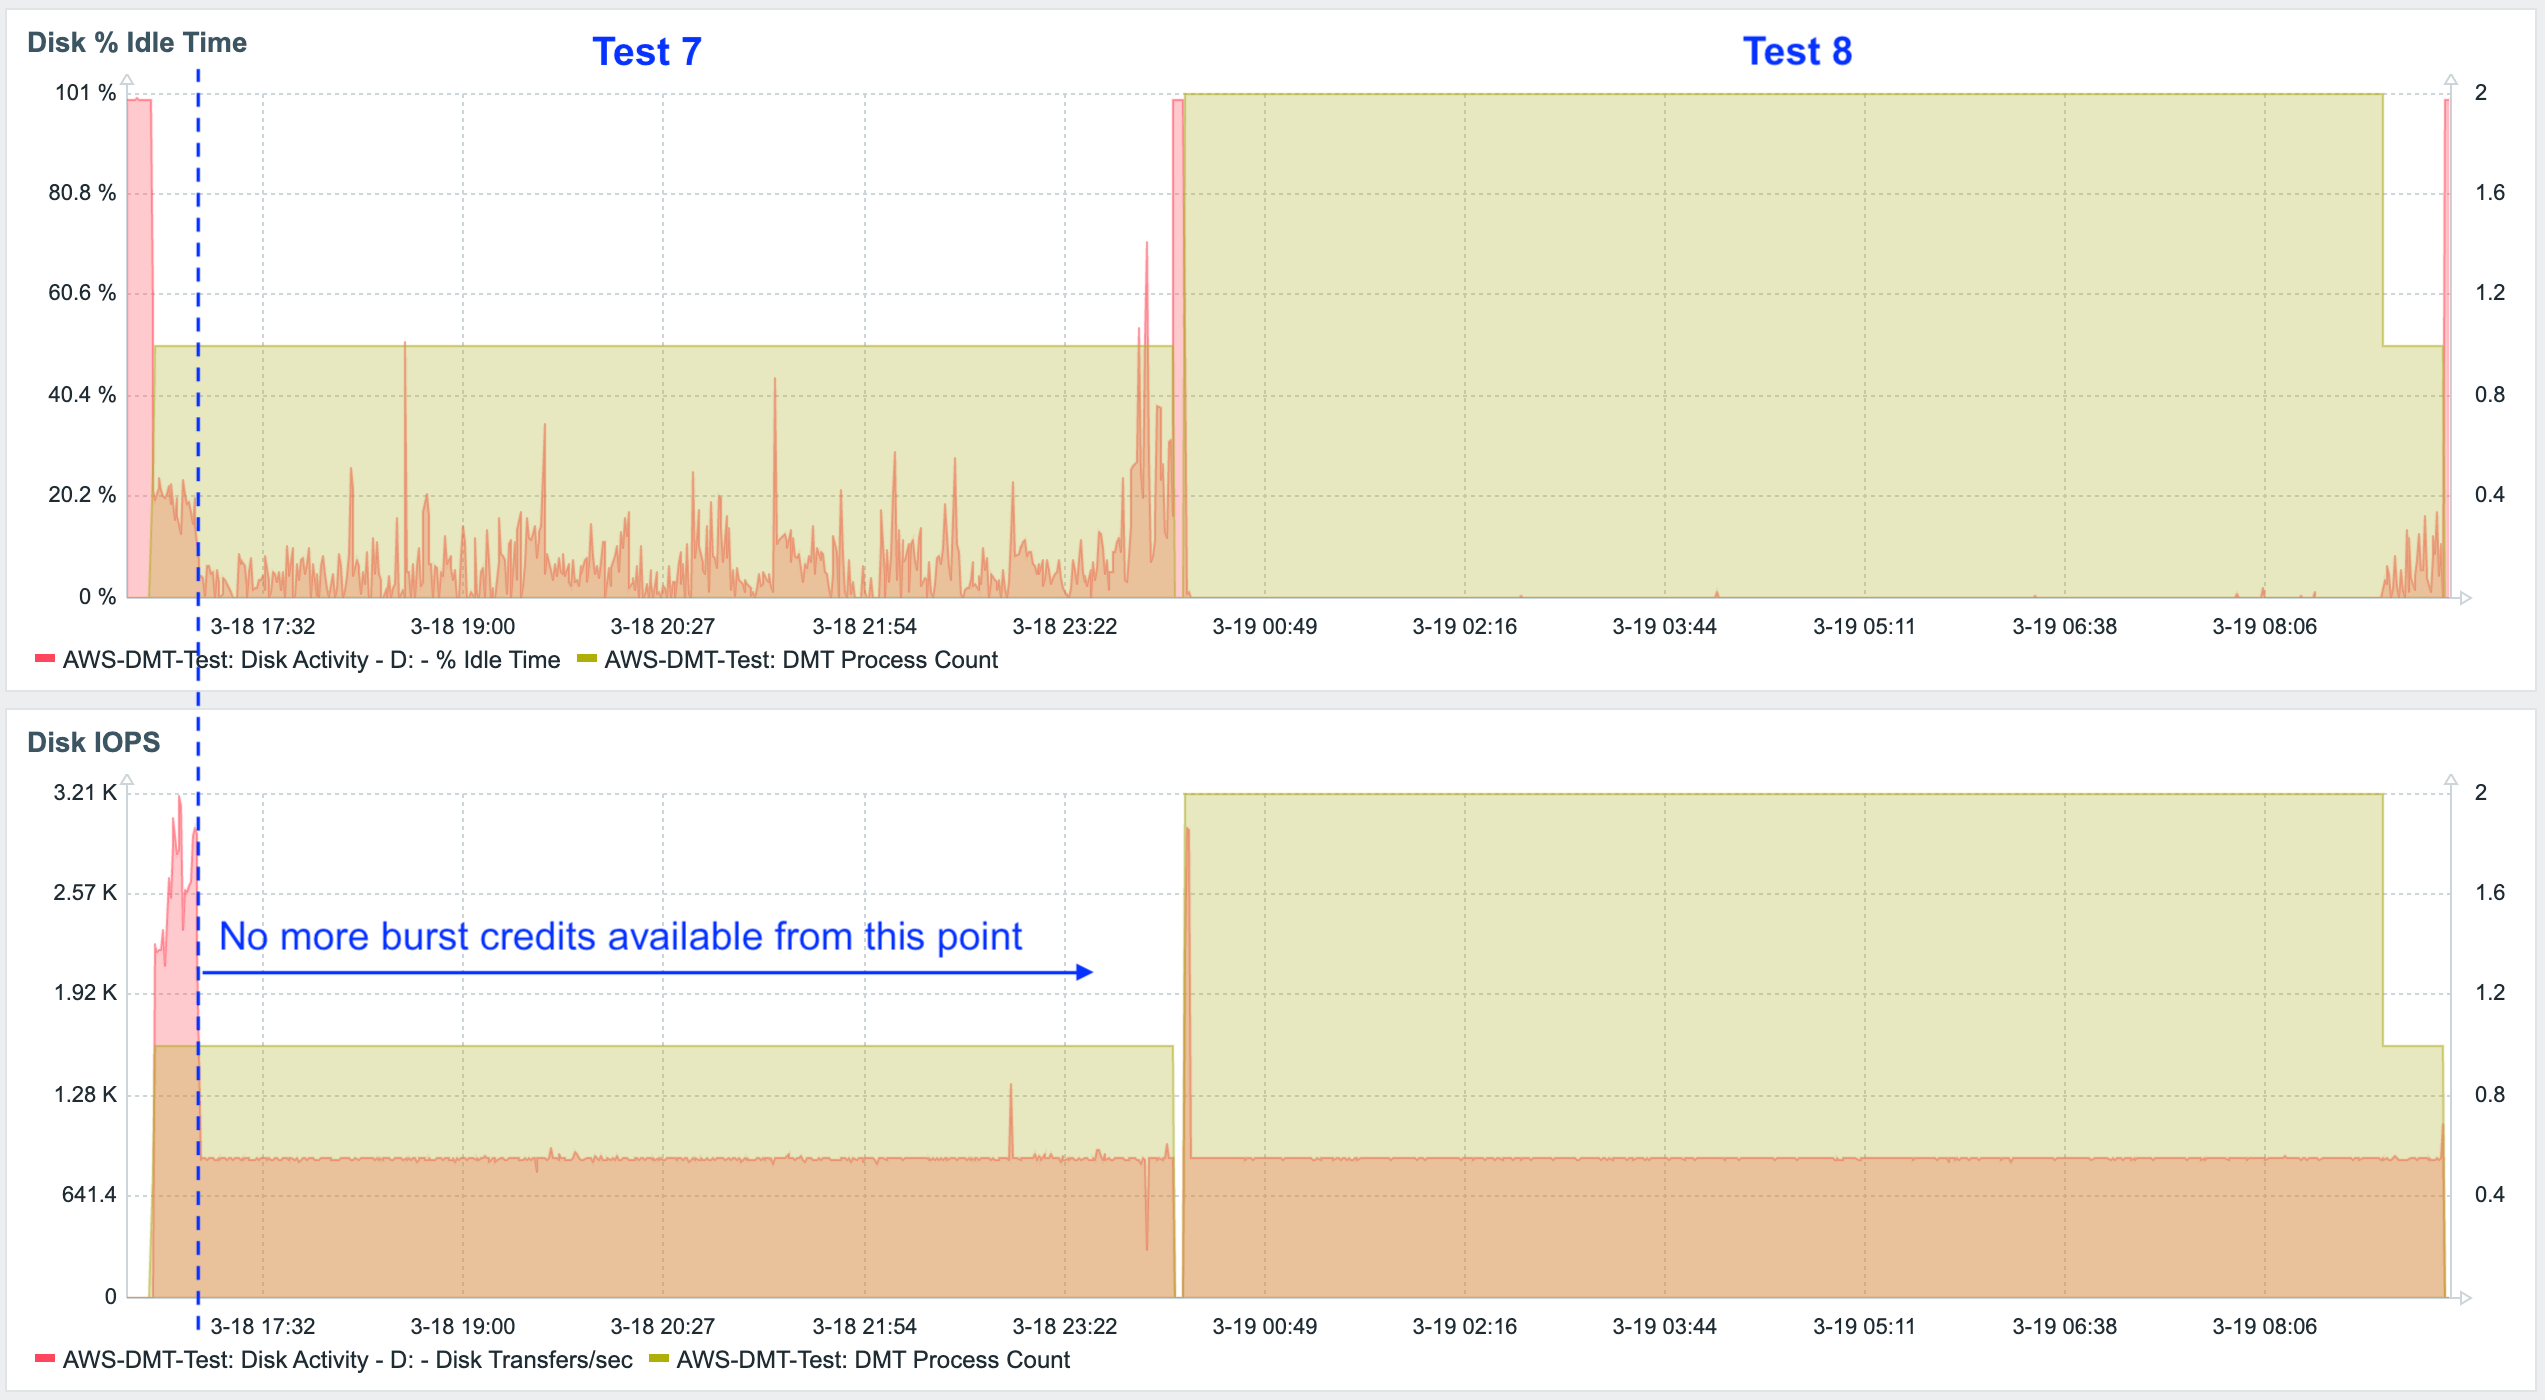 Screenshot of Zabbix tests 7 - 8 for Disk idle time and IOPS